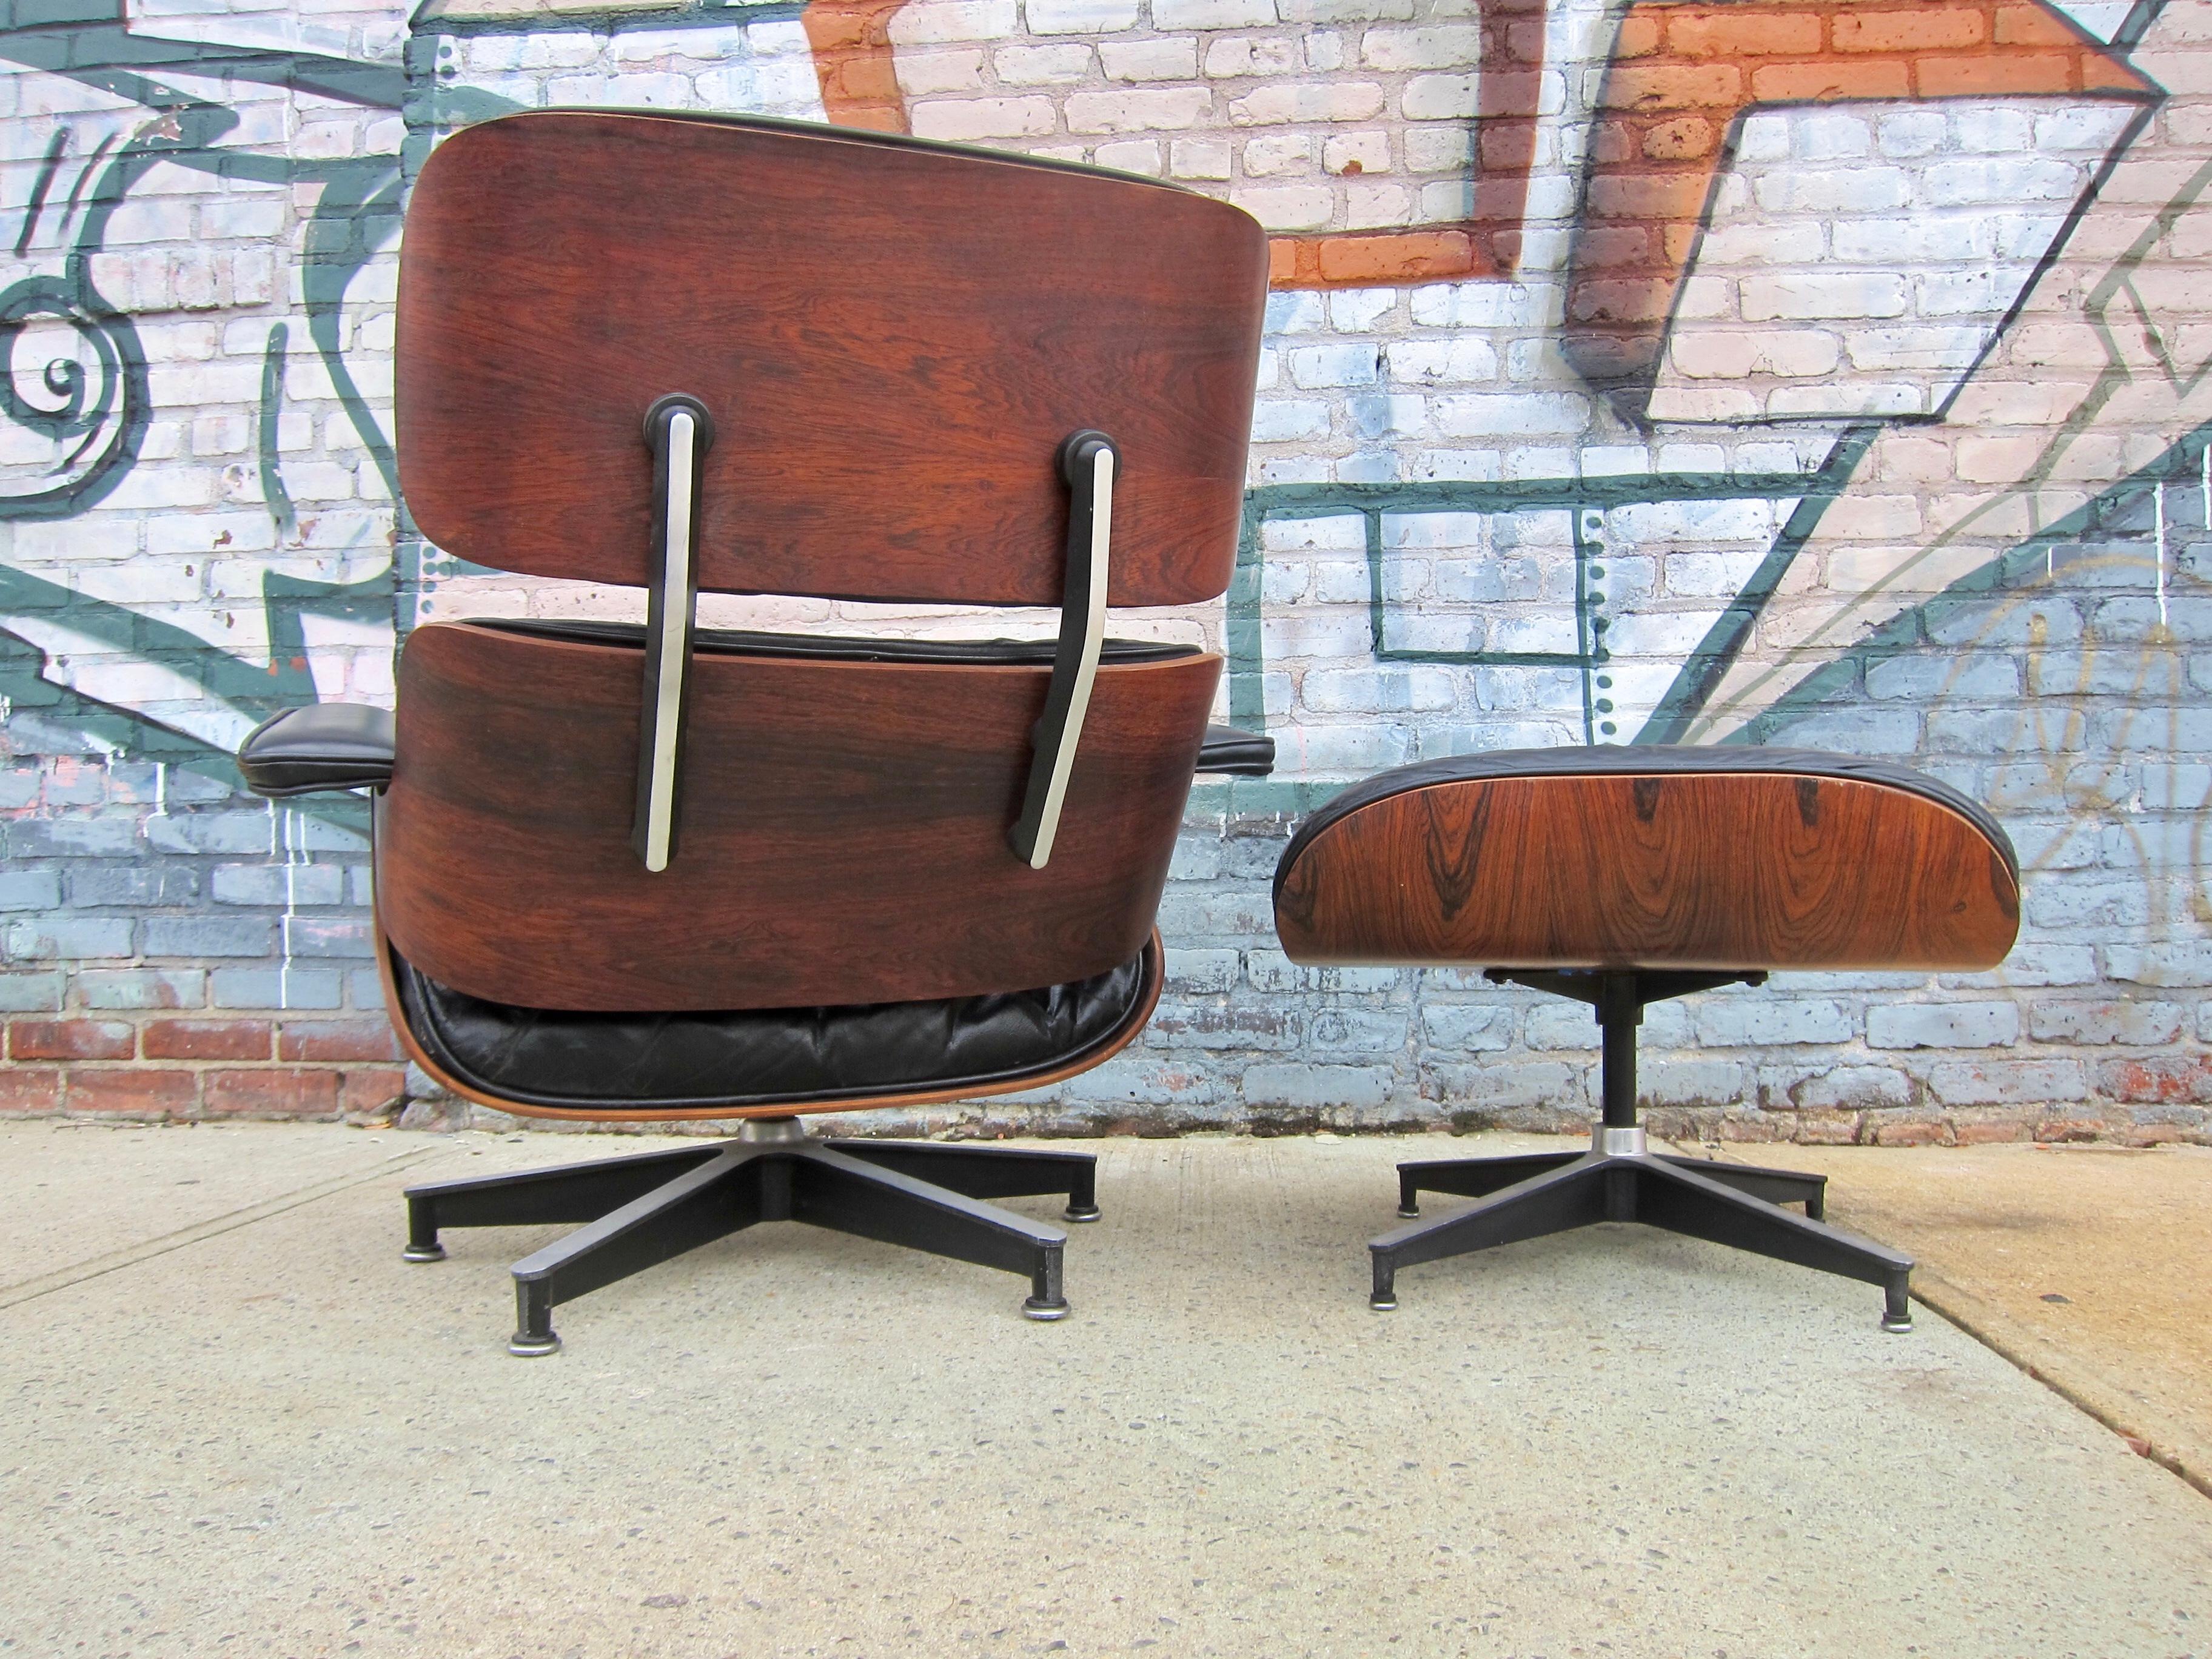 Gorgeous George Nelson lounge chair and ottoman, circa early 1960s. Signed with manufacturer tag and patent label. Original down cushions. Lovely wood grain and black tones. New mounts installed at $500 value. Ready for immediate use.